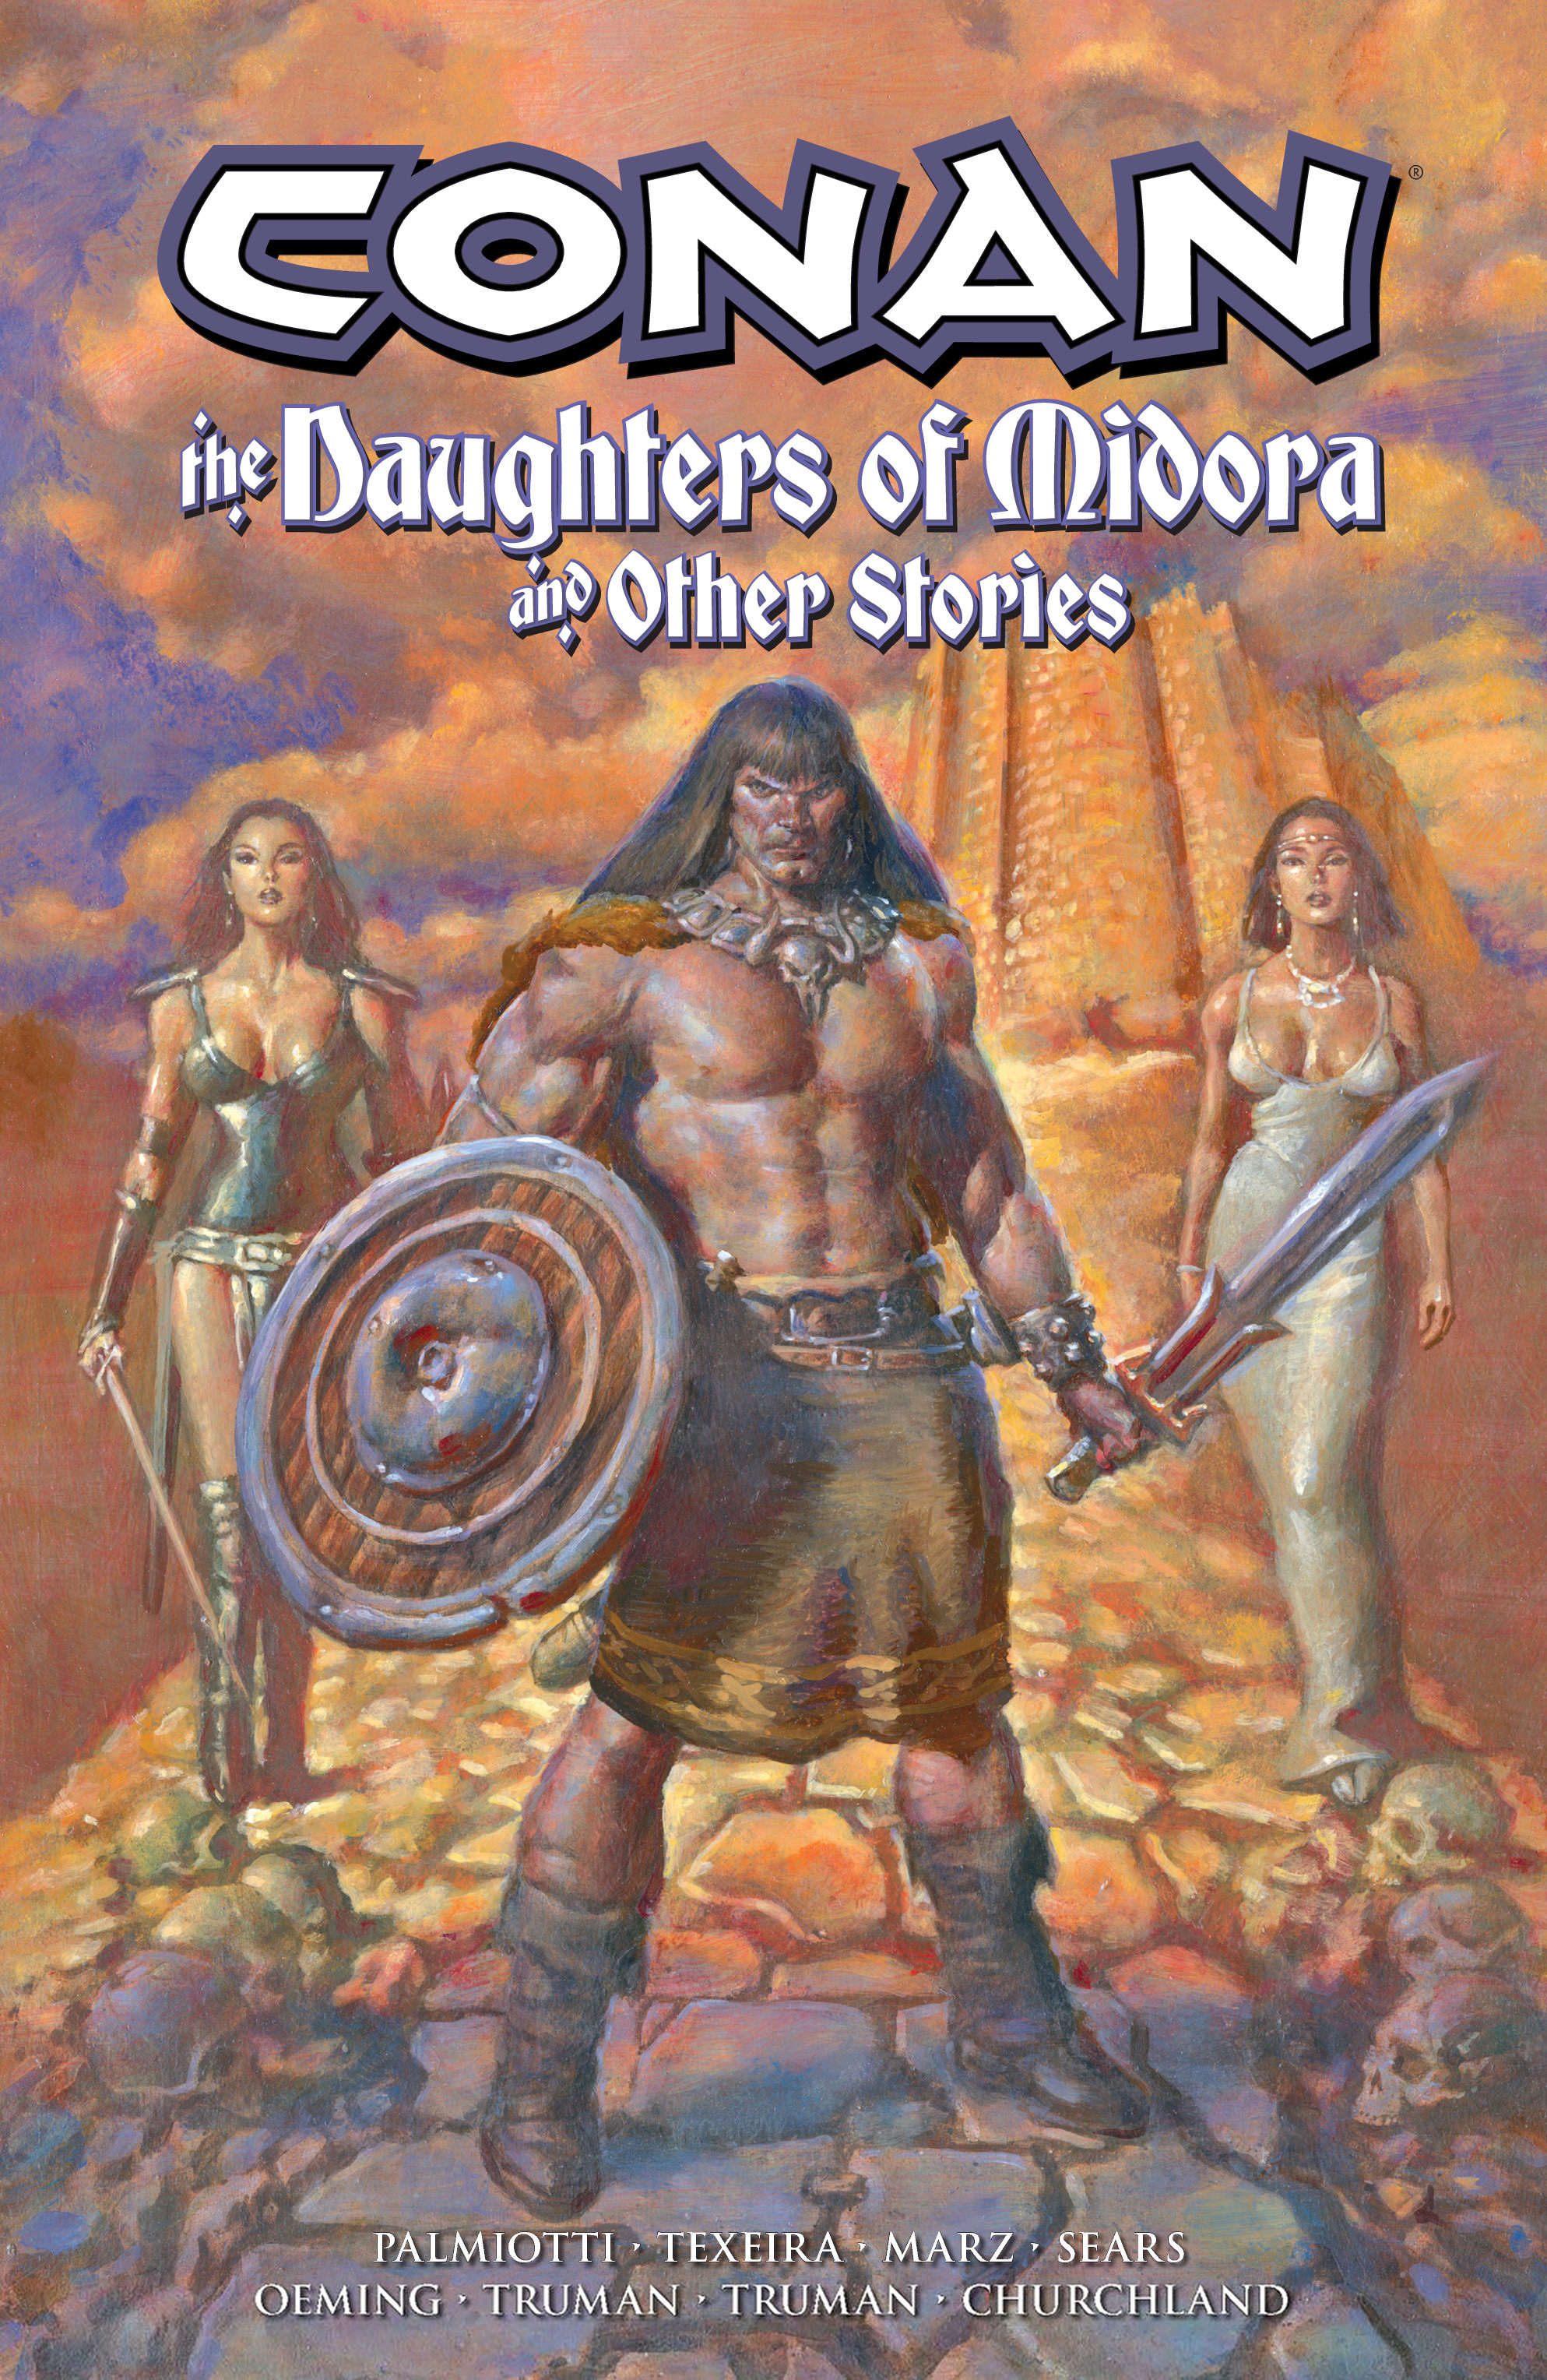 Read online Conan: The Daughters of Midora and Other Stories comic -  Issue # TPB - 1